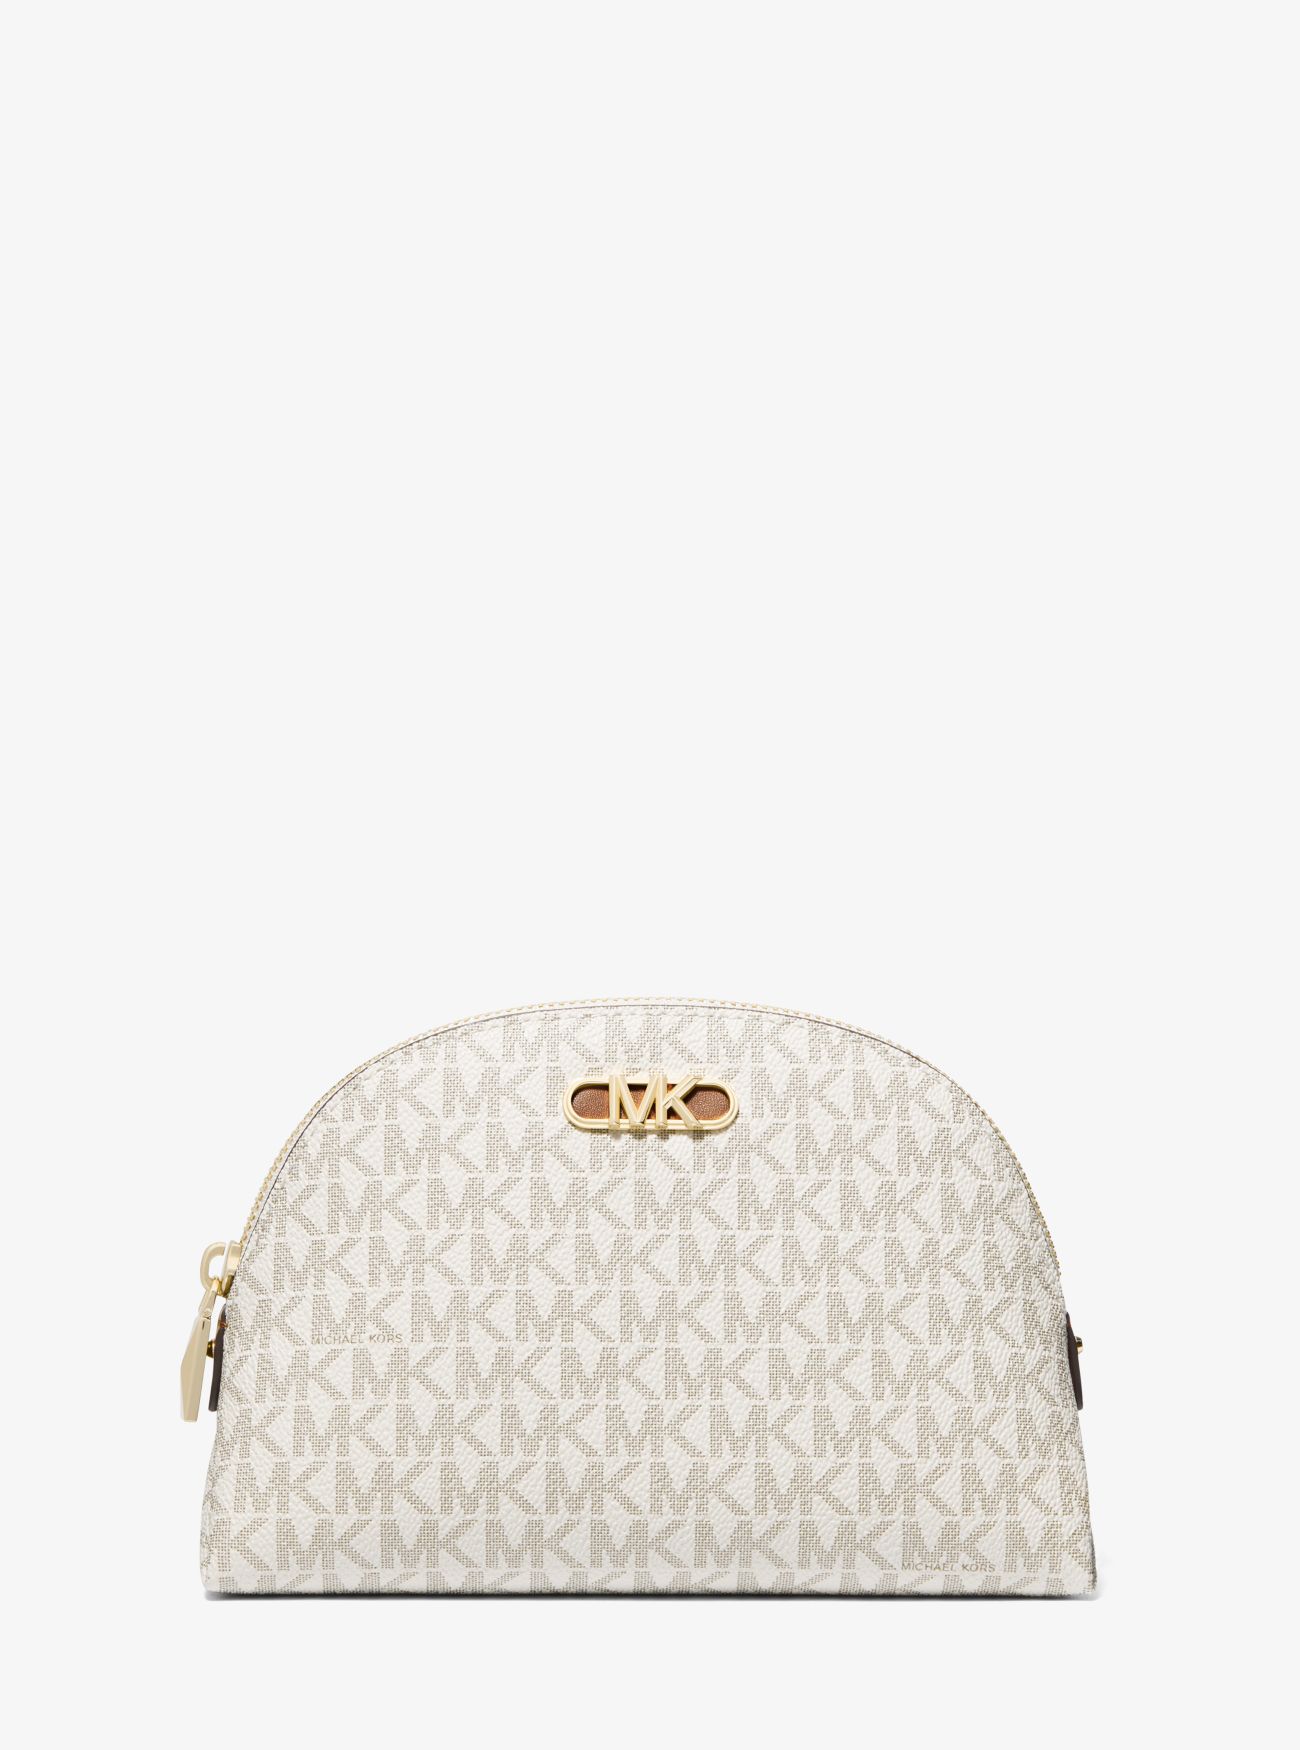 MK Empire Large Travel Pouch - Natural - Michael Kors